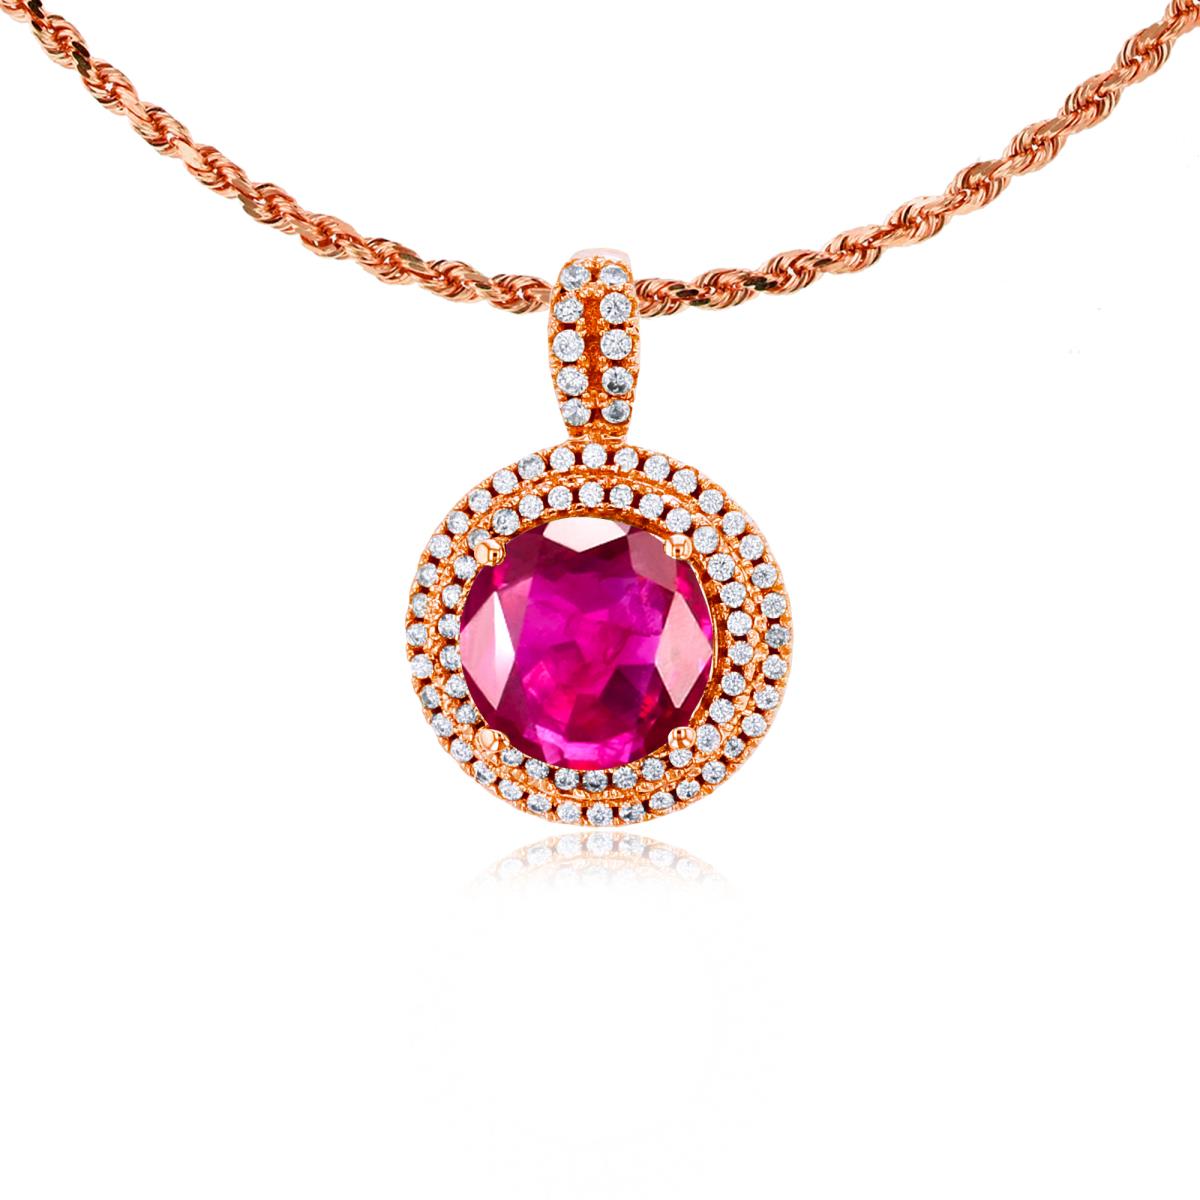 10K Rose Gold 7mm Round Glass Filled Ruby & 0.25 CTTW Diamonds Double Halo 18" Rope Chain Necklace